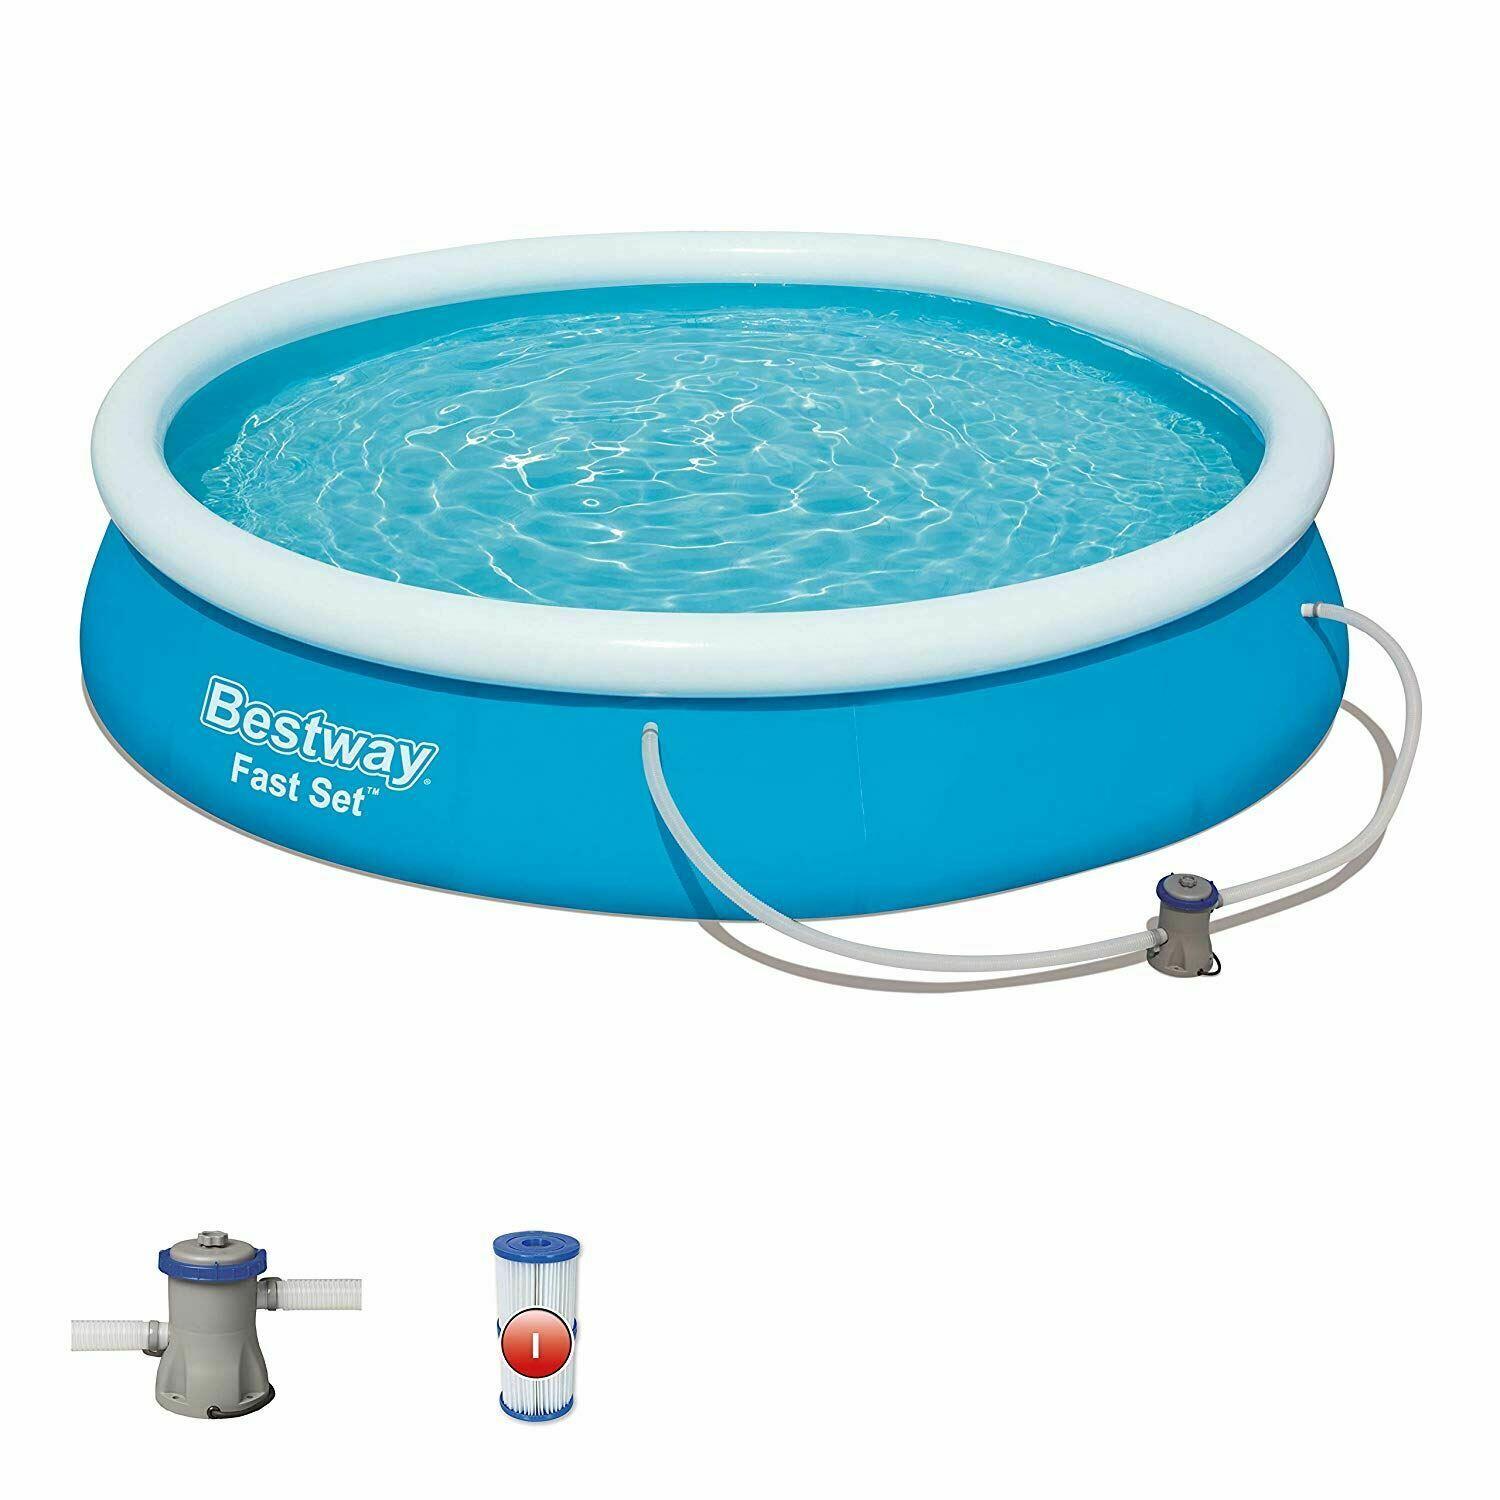 Bestway Fast Set Pool with Filter Pump - 12ft x 30in 1/2